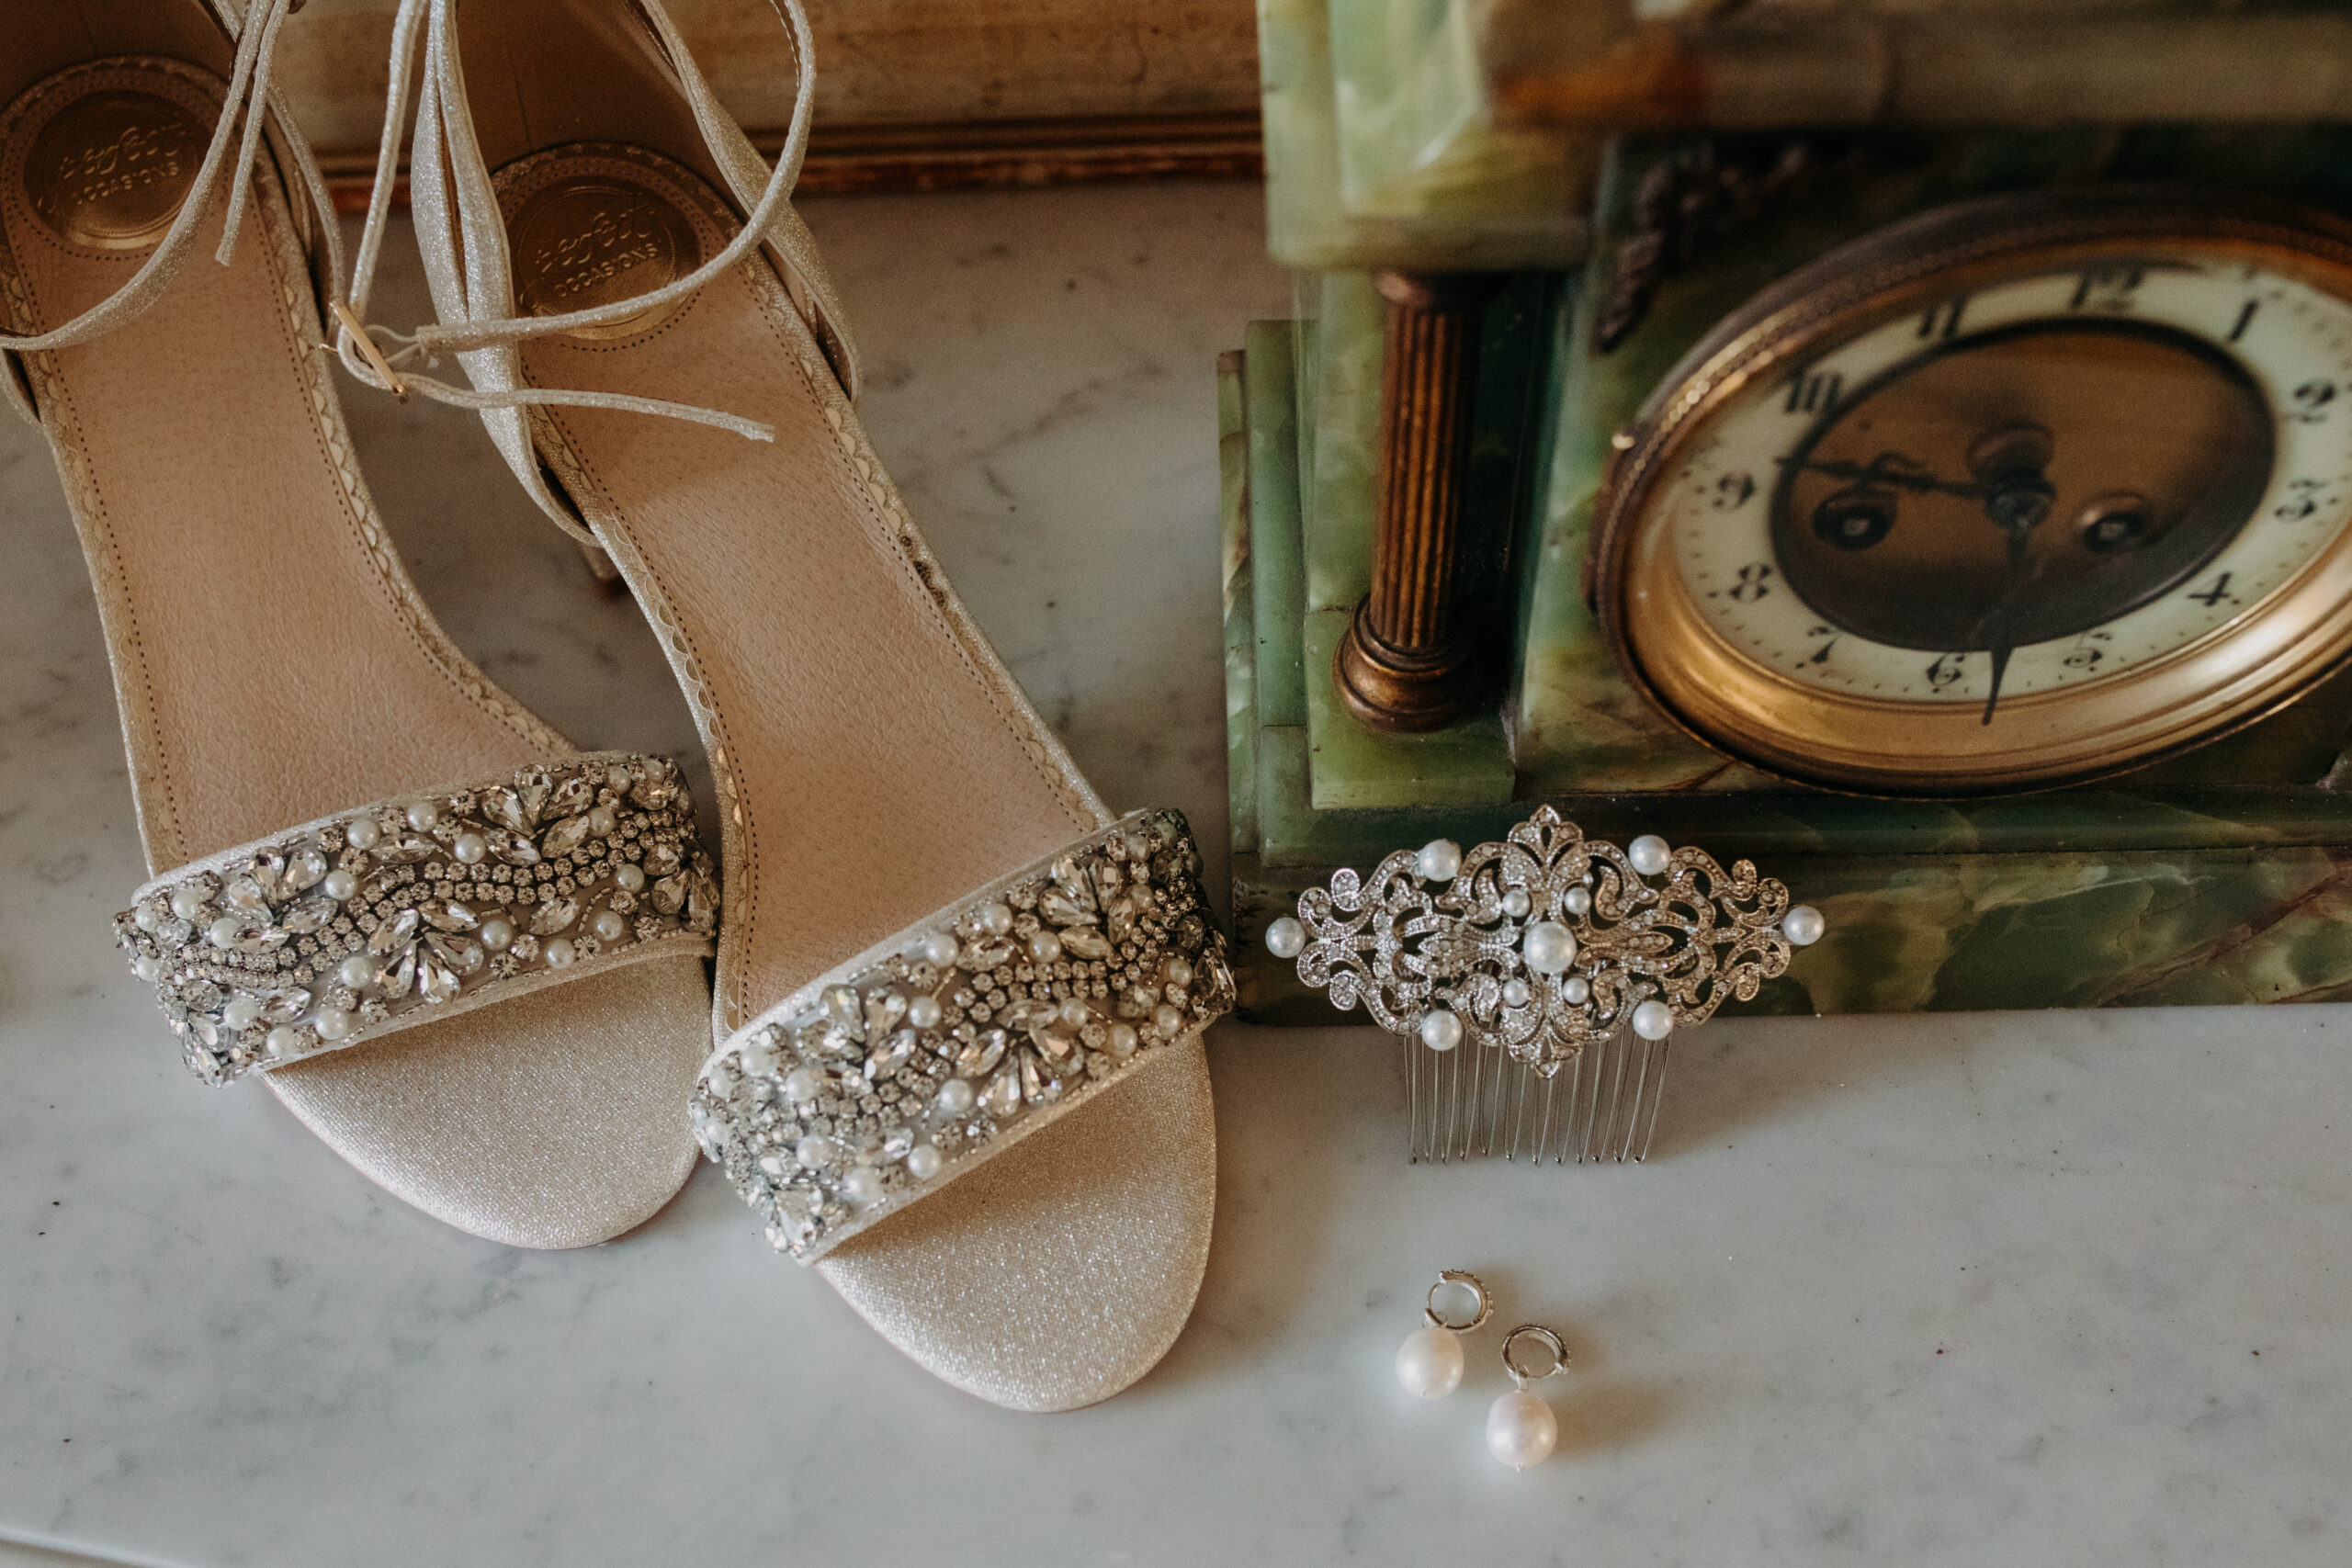 A bride's wedding heels sit to the left with a hair pin and earrings up against an old clock